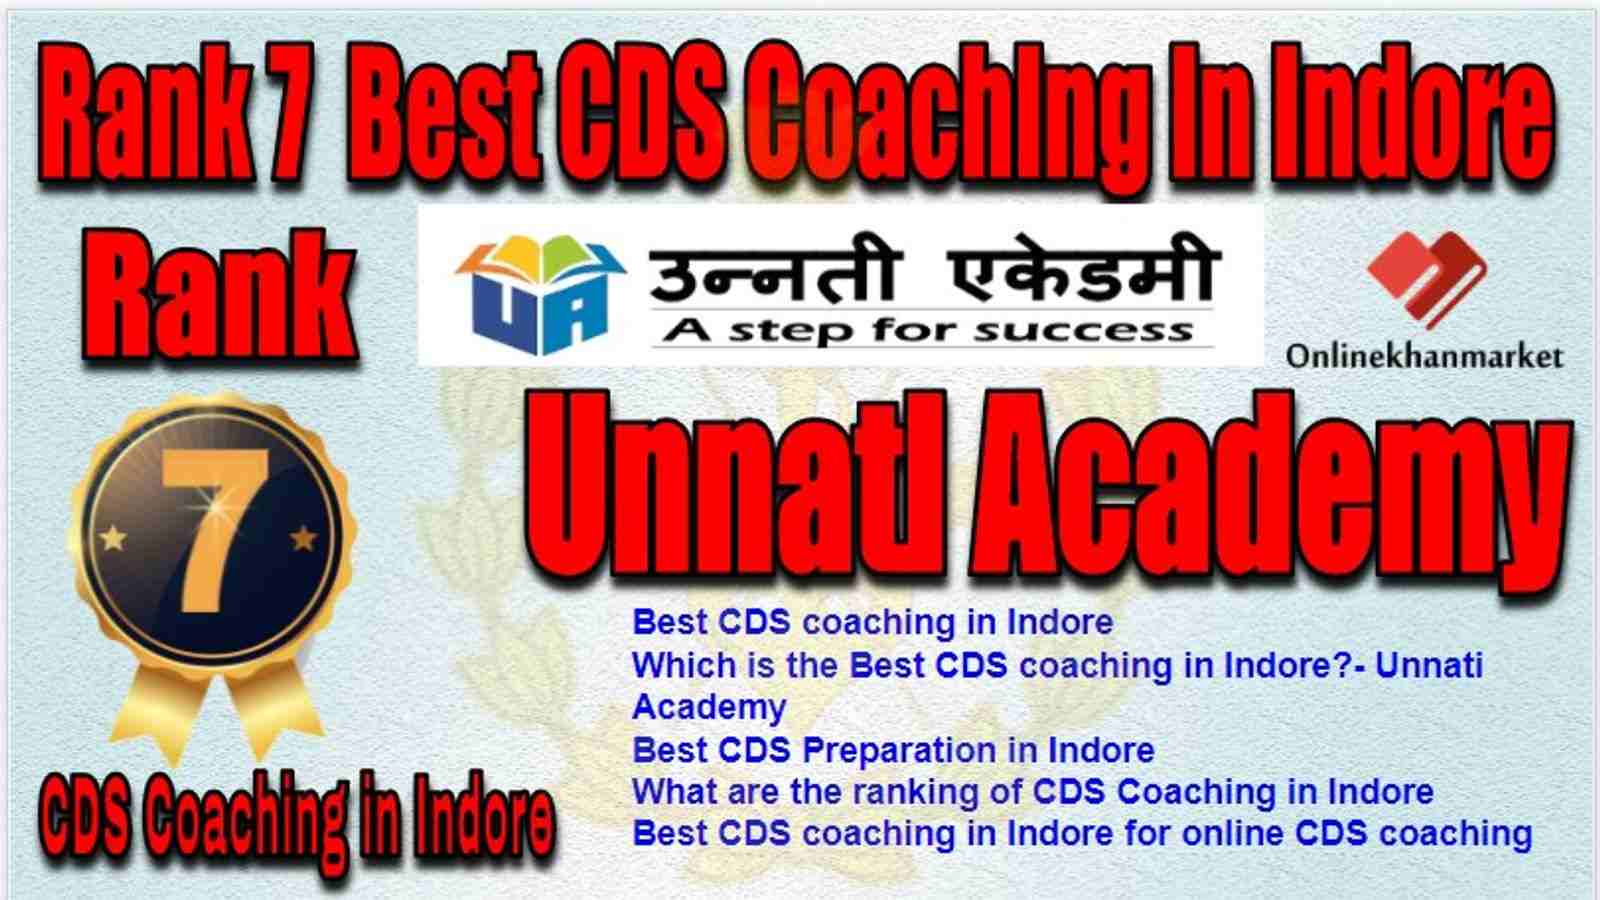 Rank 7 Best CDS Coaching in indore